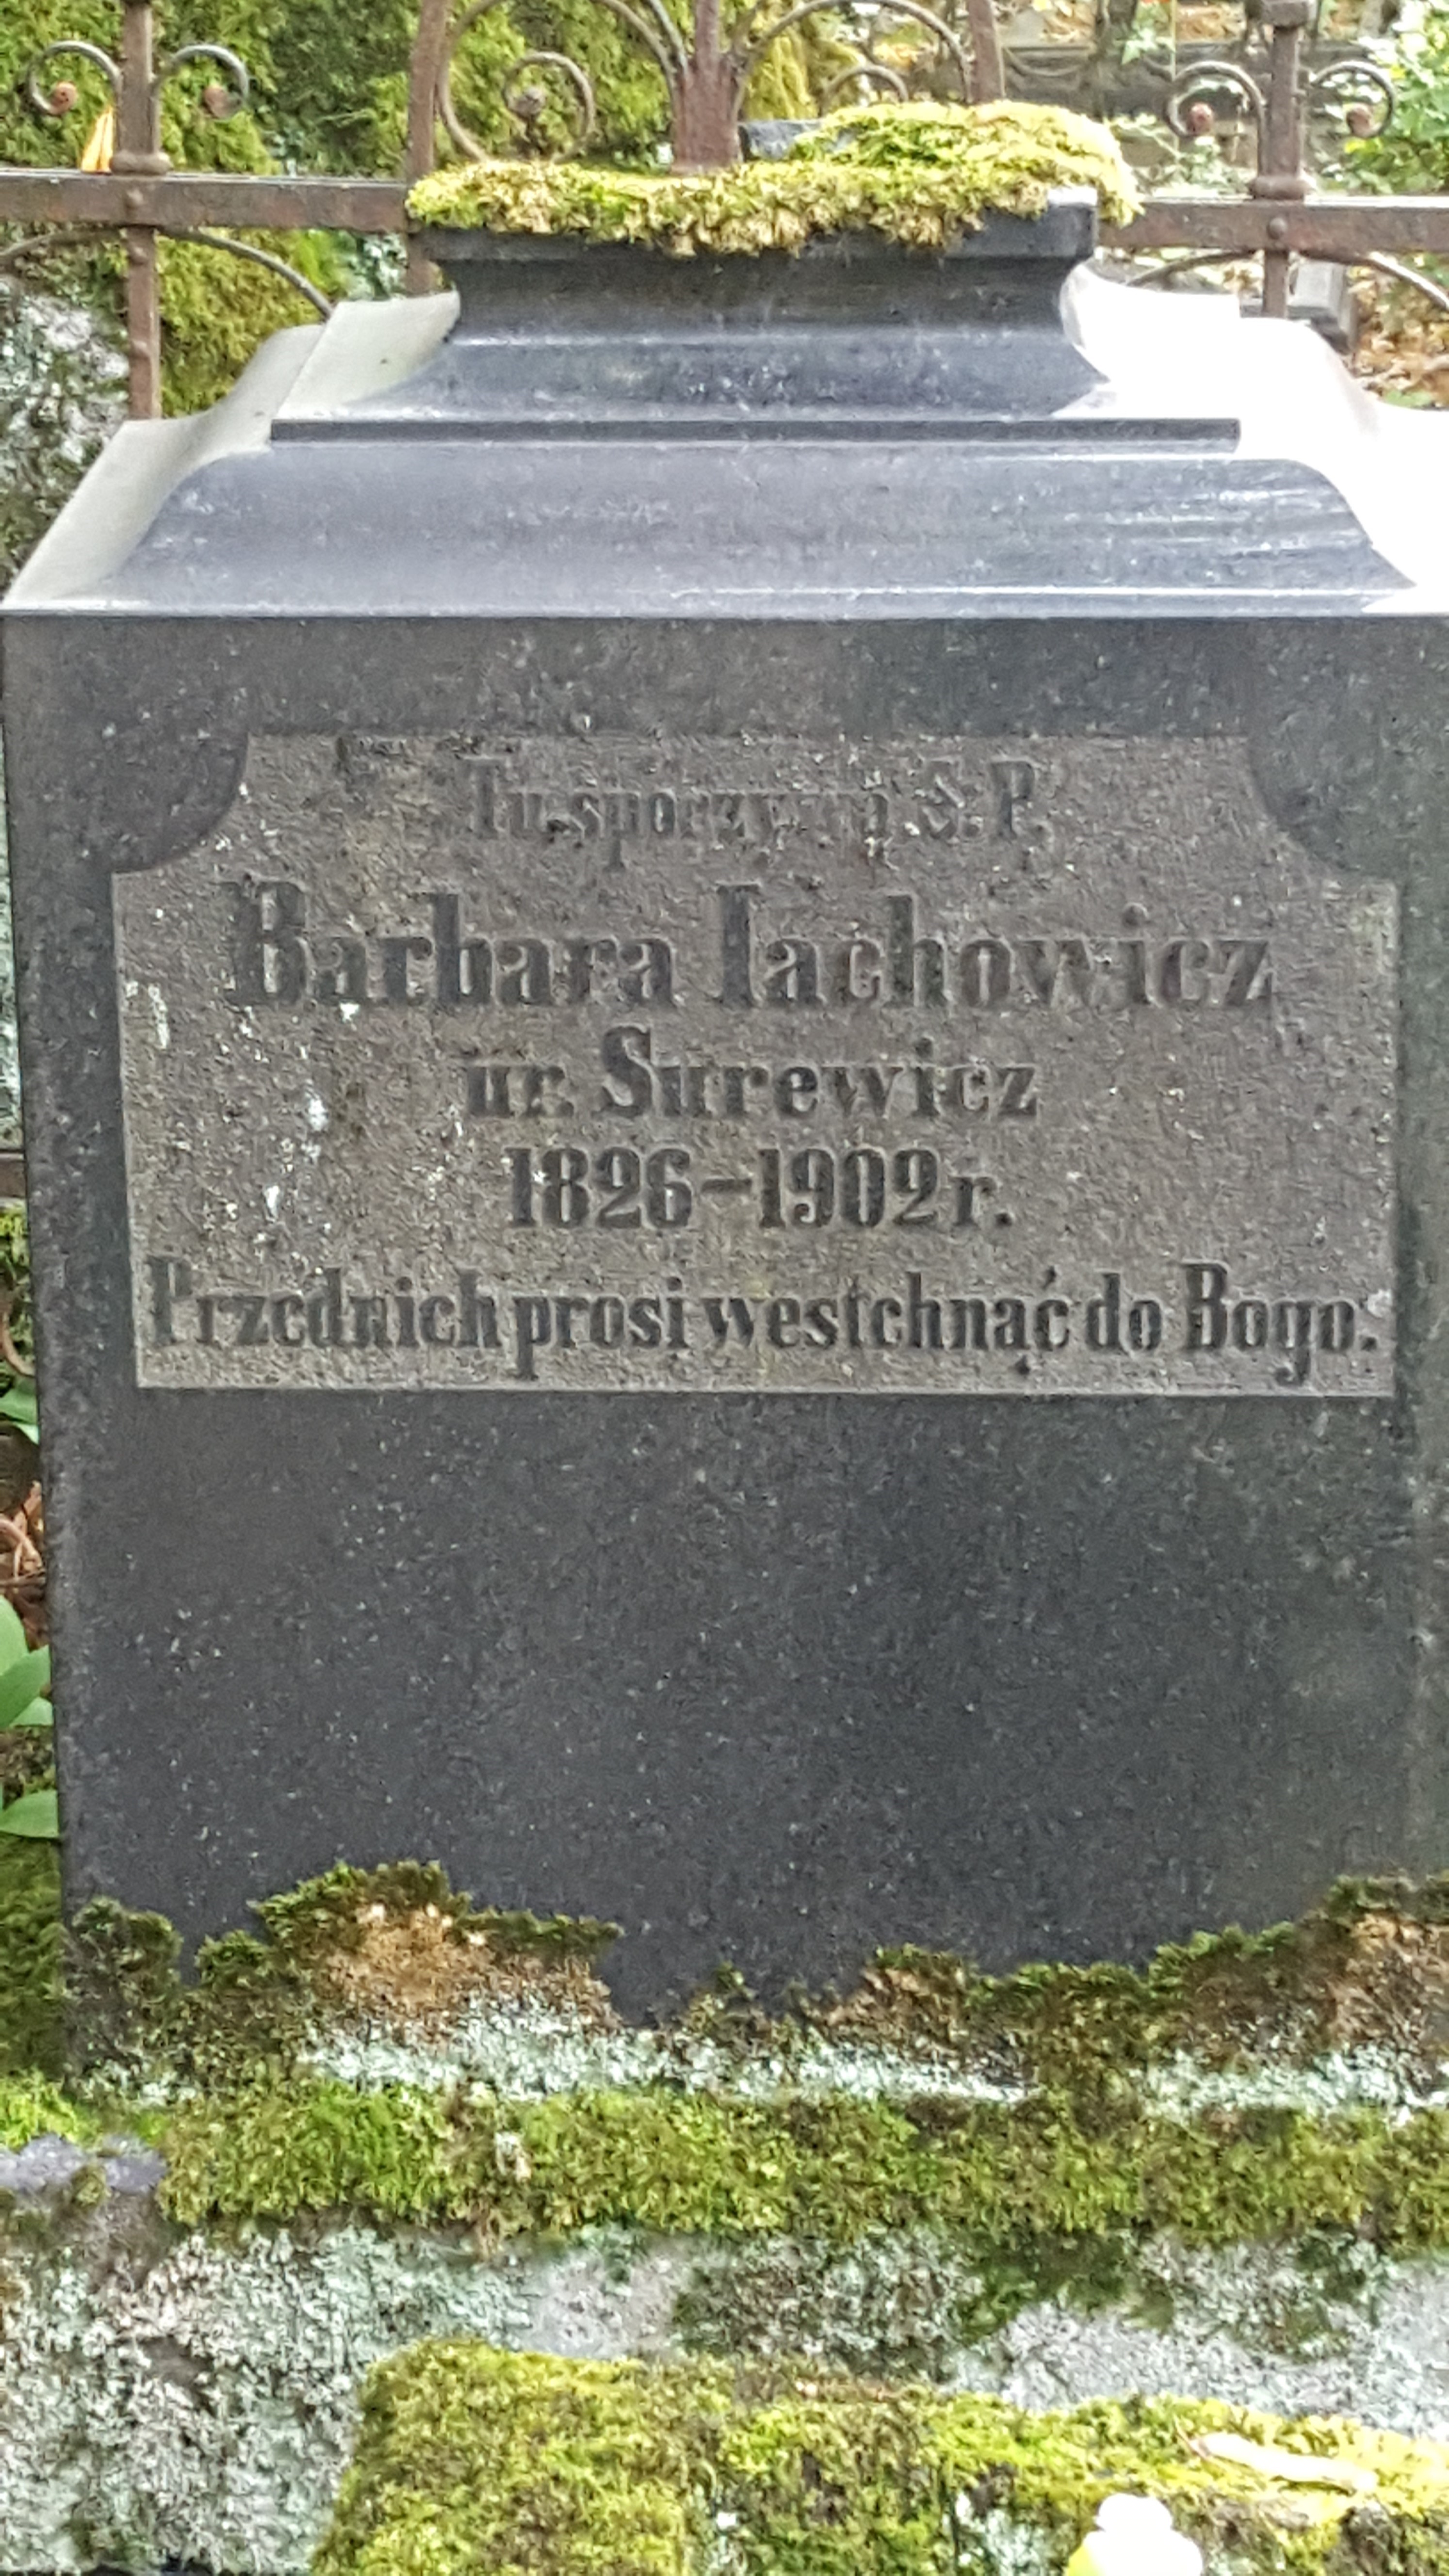 Inscription from the gravestone of Barbara Lachowicz, St Michael's cemetery in Riga, as of 2021.